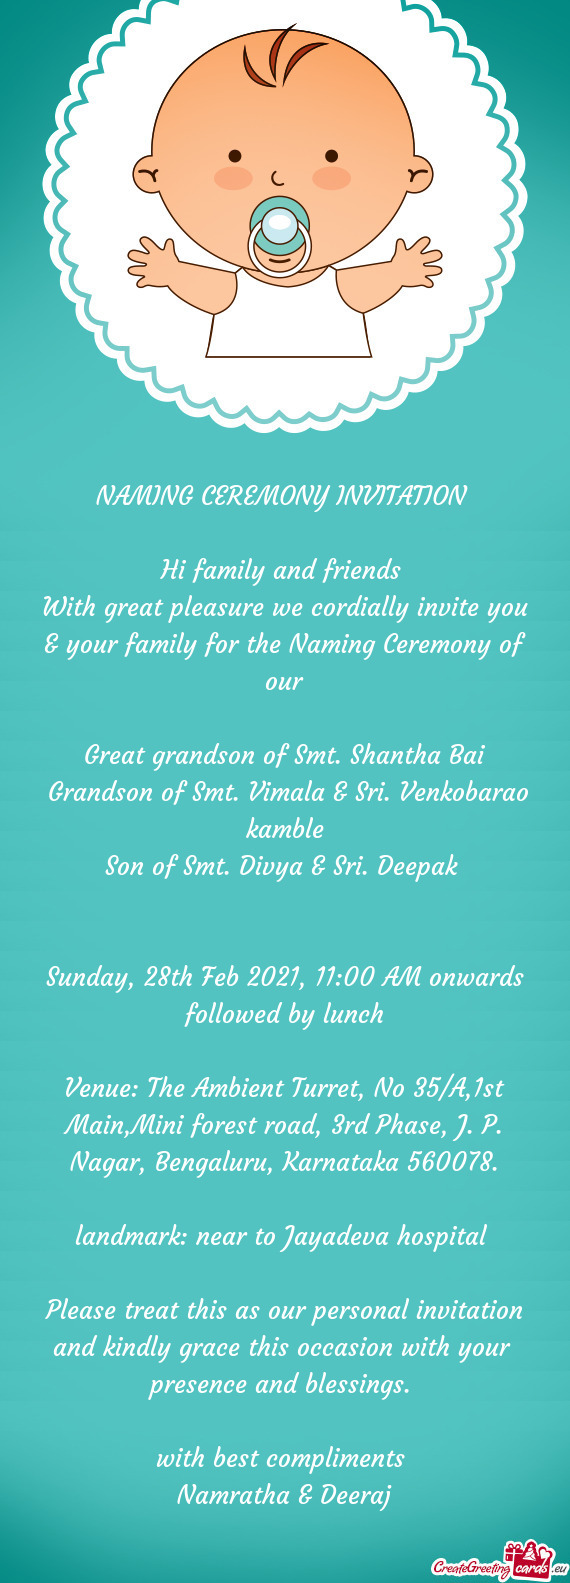 With great pleasure we cordially invite you & your family for the Naming Ceremony of our